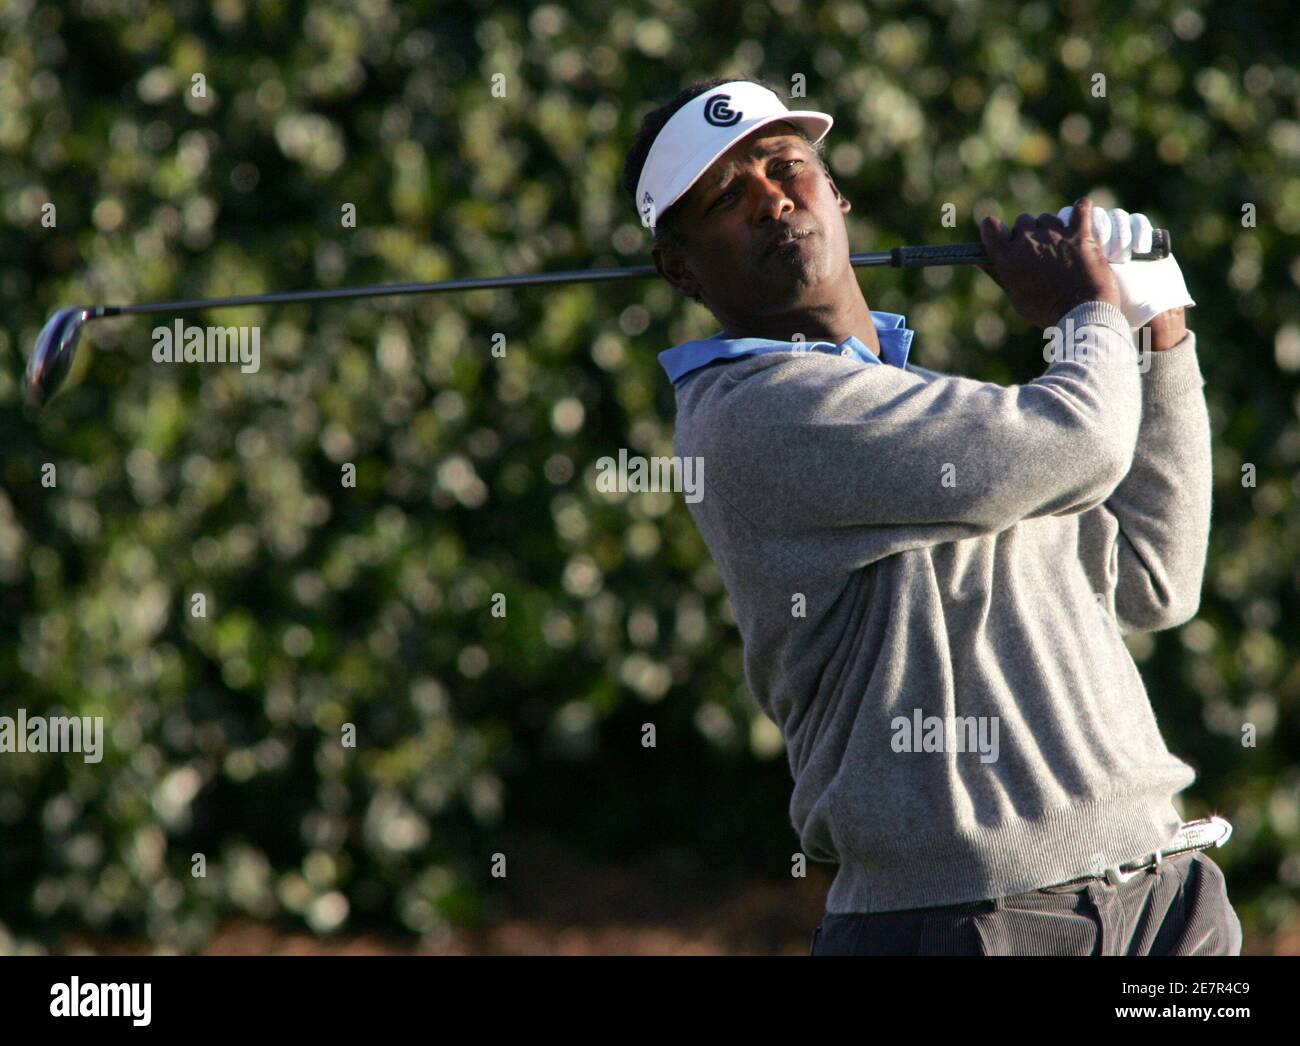 Vijay Singh of Fiji tees off on the 18th hole during the third round at The Players Championship golf tournament in Ponte Vedra Beach, Florida on March 25, 2006. Singh finished tied for second with Sergio Garcia at eight under par with a score of 208. REUTERS/Rick Fowler Stock Photo